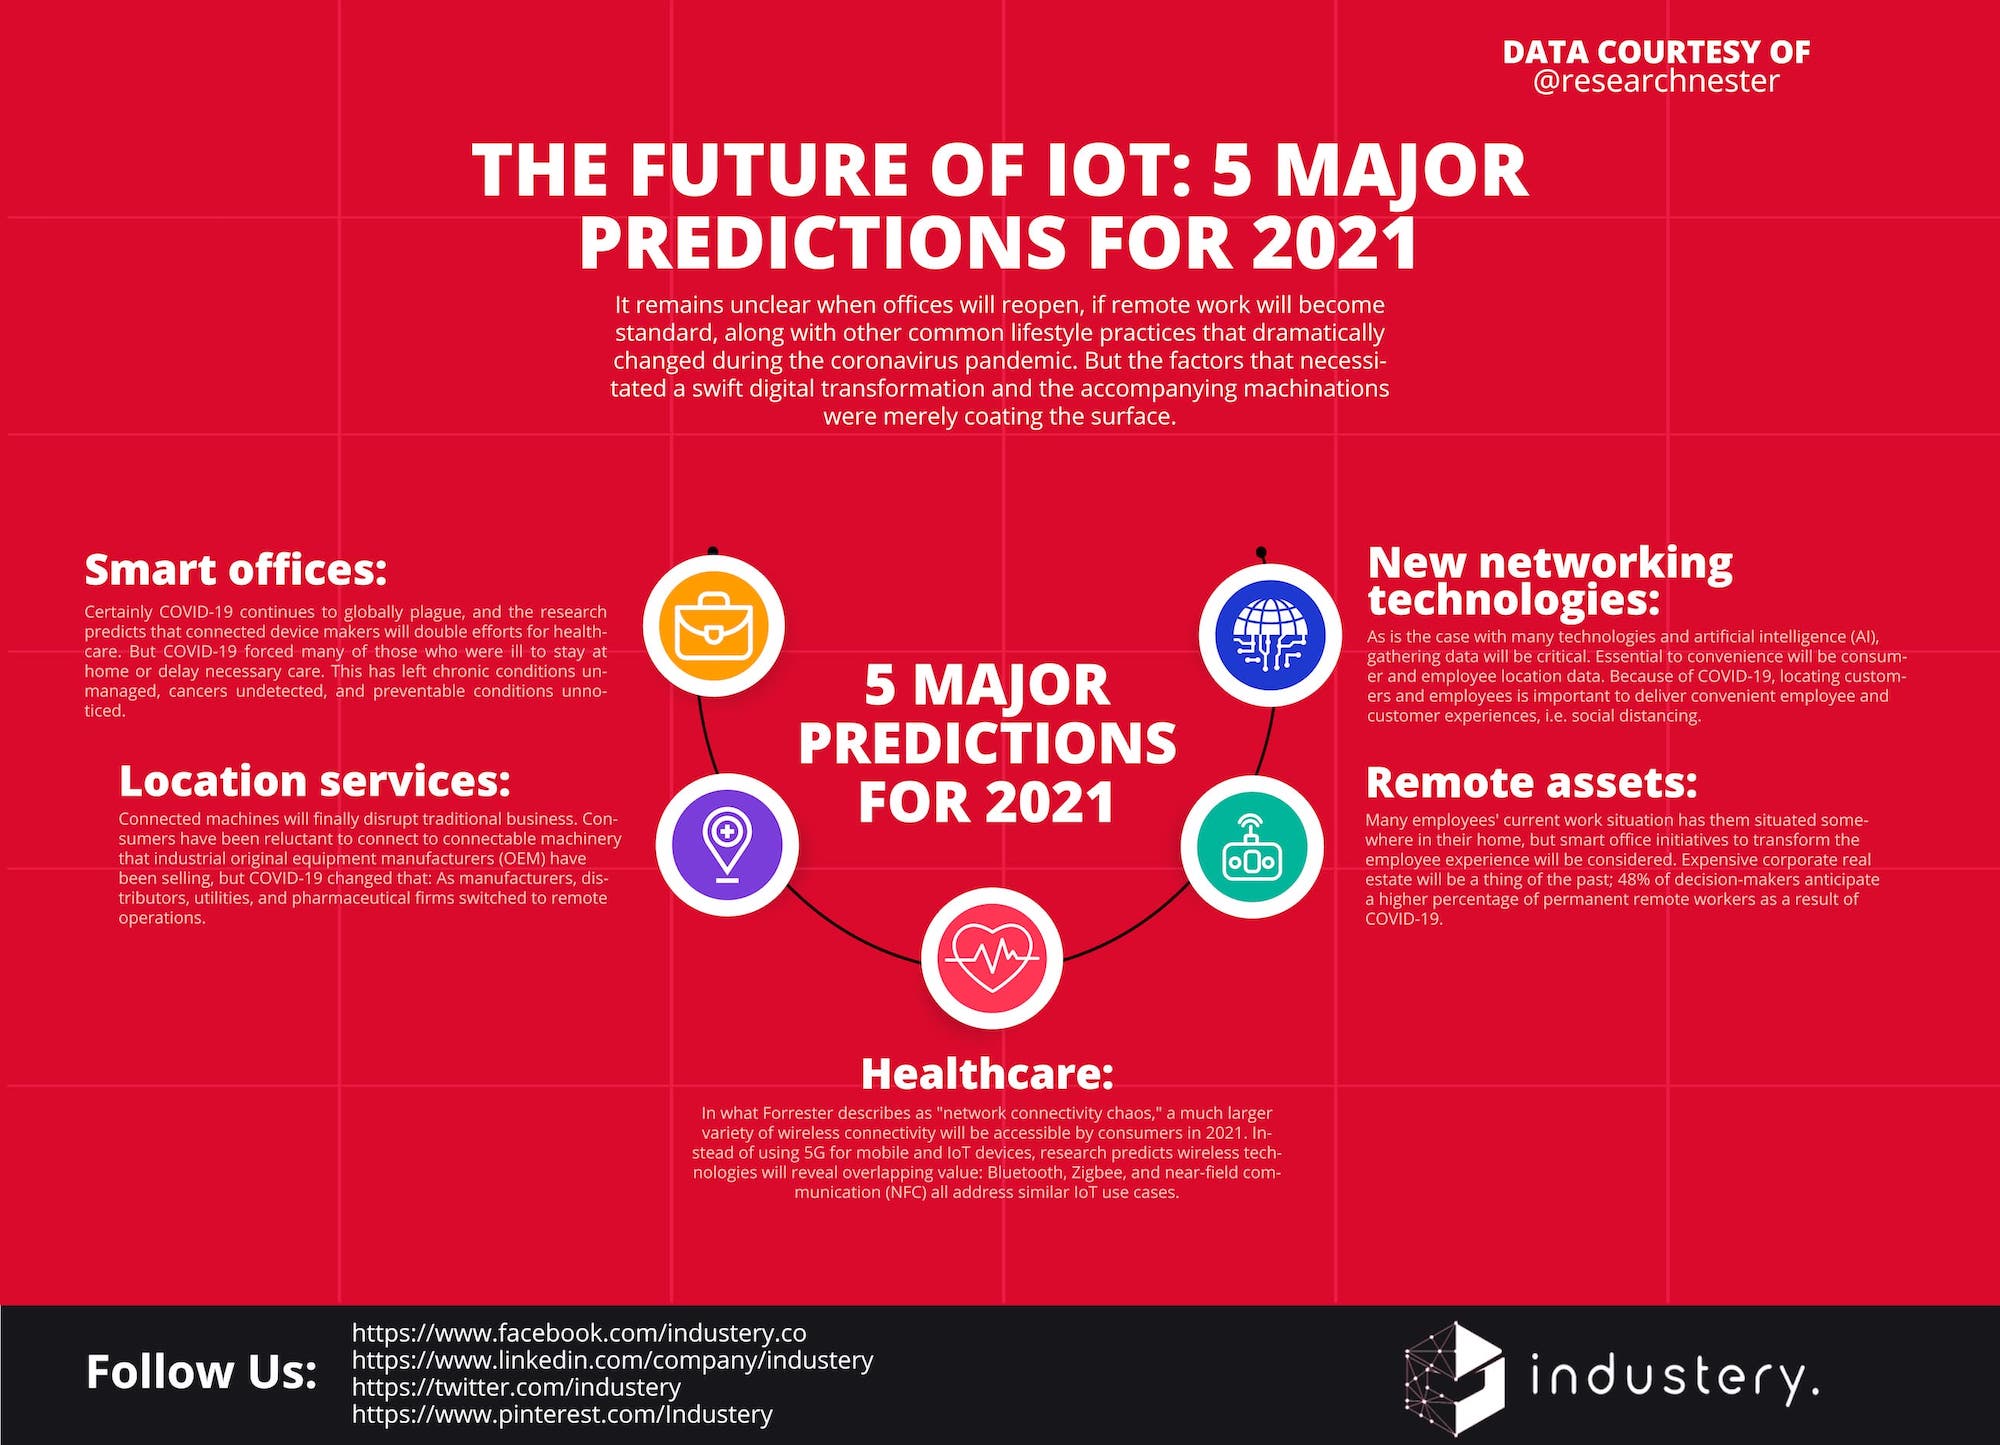 The future of IoT